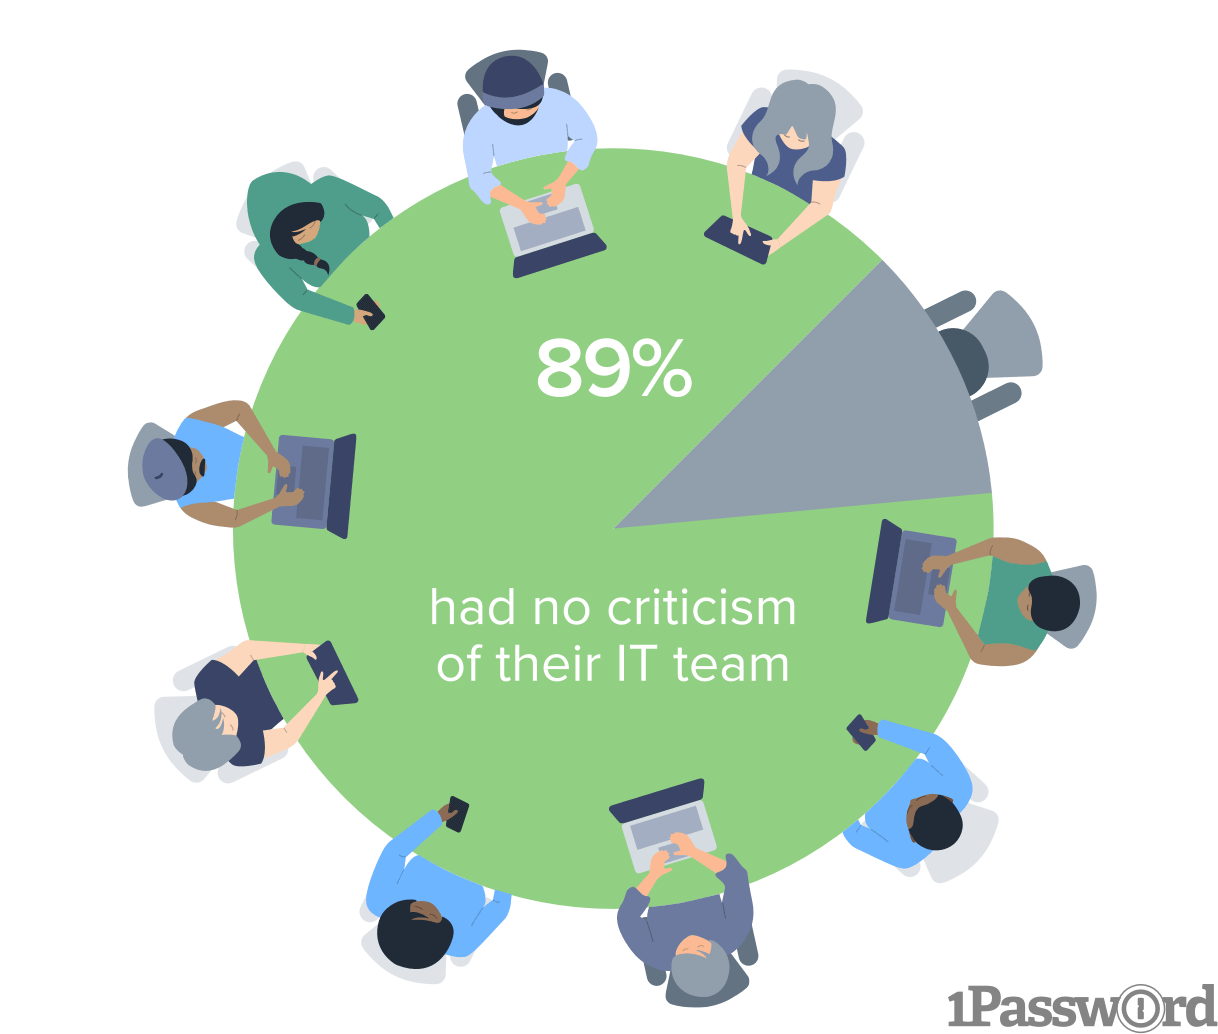 A big 89% of people looking happy about their IT teams